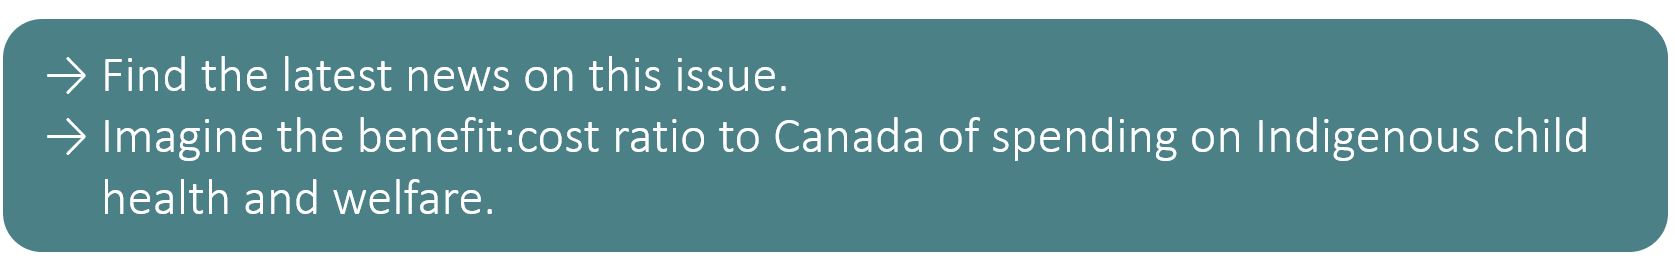 Find the latest news on this issue. Imagine the benefit:cost ratio to Canada of spending on Indigenous child health and welfare.